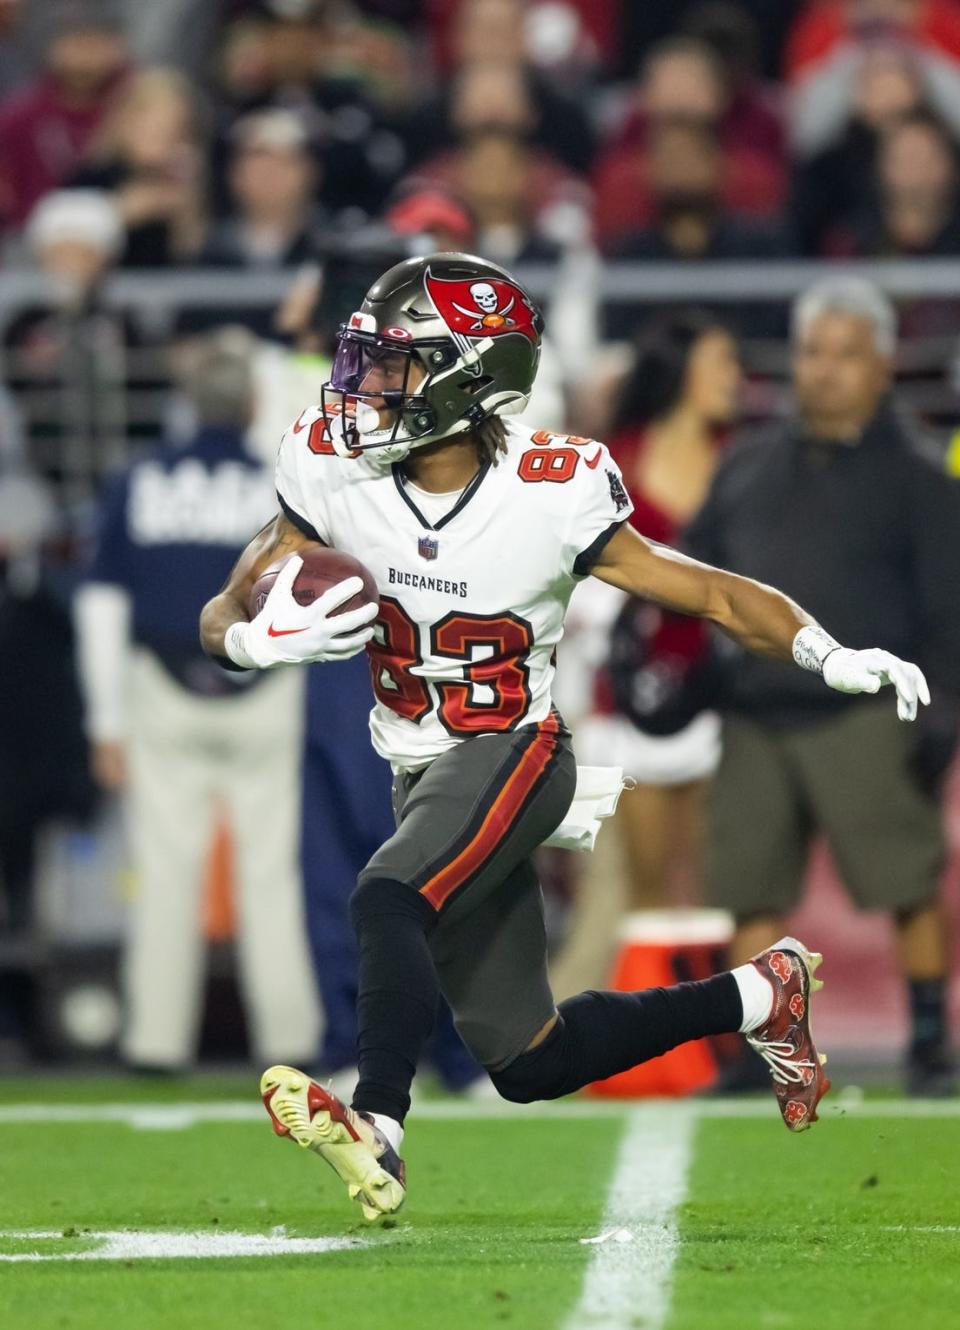 Tampa Bay Buccaneers wide receiver Deven Thompkins against the Arizona Cardinals at State Farm Stadium on Dec 25, 2022.